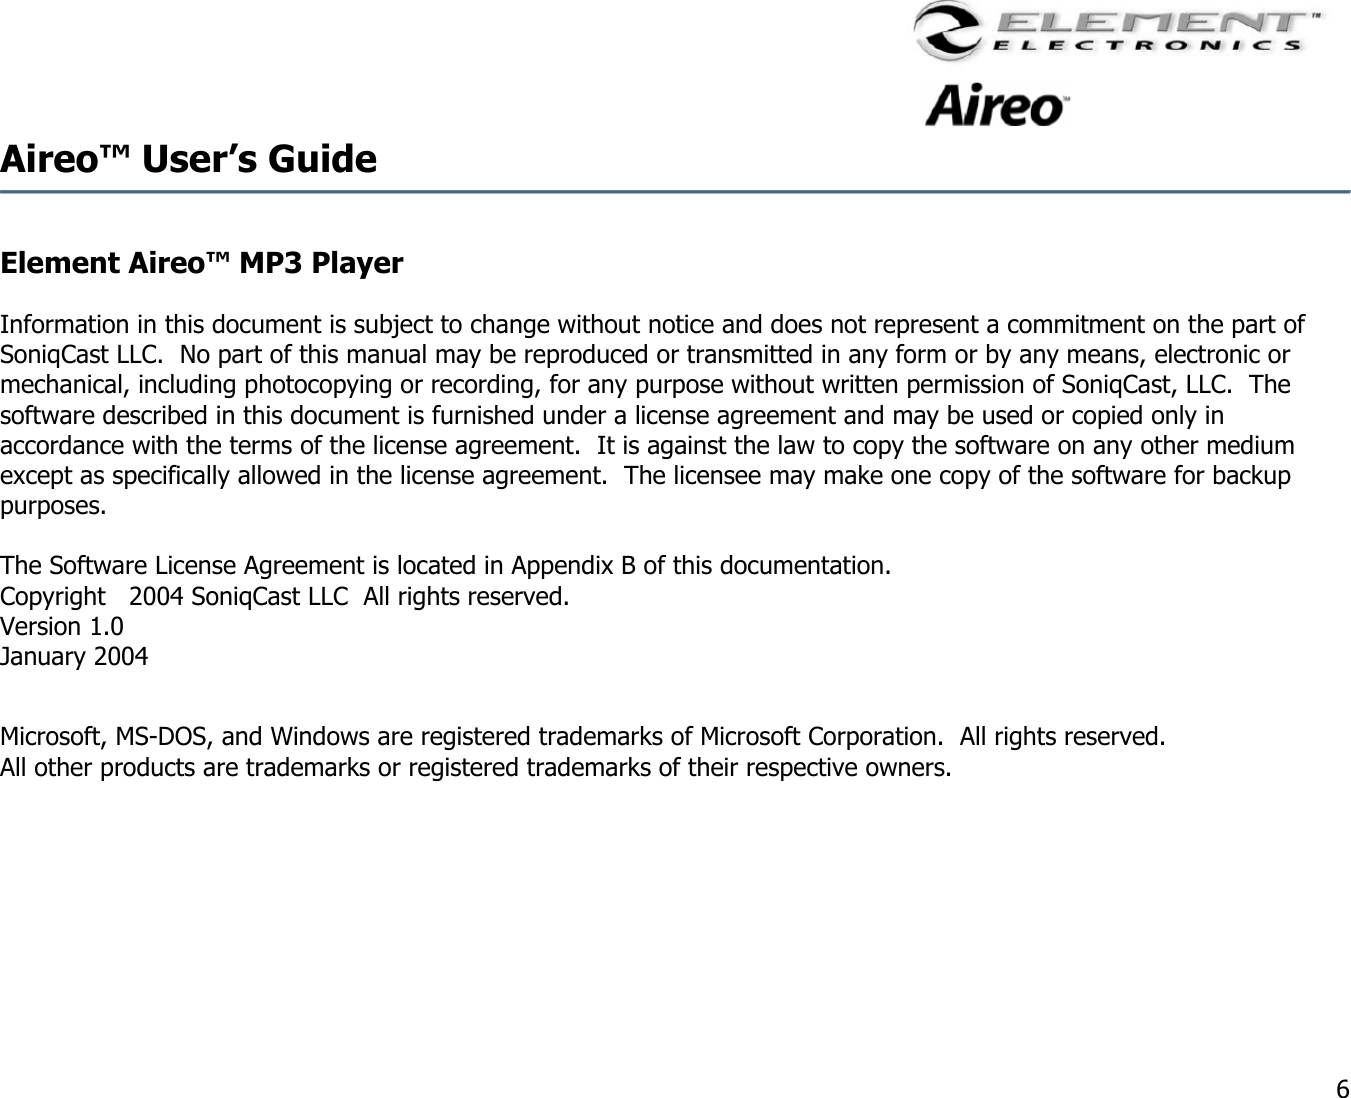                                                                                    6 Aireo™ User’s Guide   Element Aireo™ MP3 Player   Information in this document is subject to change without notice and does not represent a commitment on the part of SoniqCast LLC.  No part of this manual may be reproduced or transmitted in any form or by any means, electronic or mechanical, including photocopying or recording, for any purpose without written permission of SoniqCast, LLC.  The software described in this document is furnished under a license agreement and may be used or copied only in accordance with the terms of the license agreement.  It is against the law to copy the software on any other medium except as specifically allowed in the license agreement.  The licensee may make one copy of the software for backup purposes.  The Software License Agreement is located in Appendix B of this documentation. Copyright   2004 SoniqCast LLC  All rights reserved.   Version 1.0 January 2004  Microsoft, MS-DOS, and Windows are registered trademarks of Microsoft Corporation.  All rights reserved. All other products are trademarks or registered trademarks of their respective owners.     